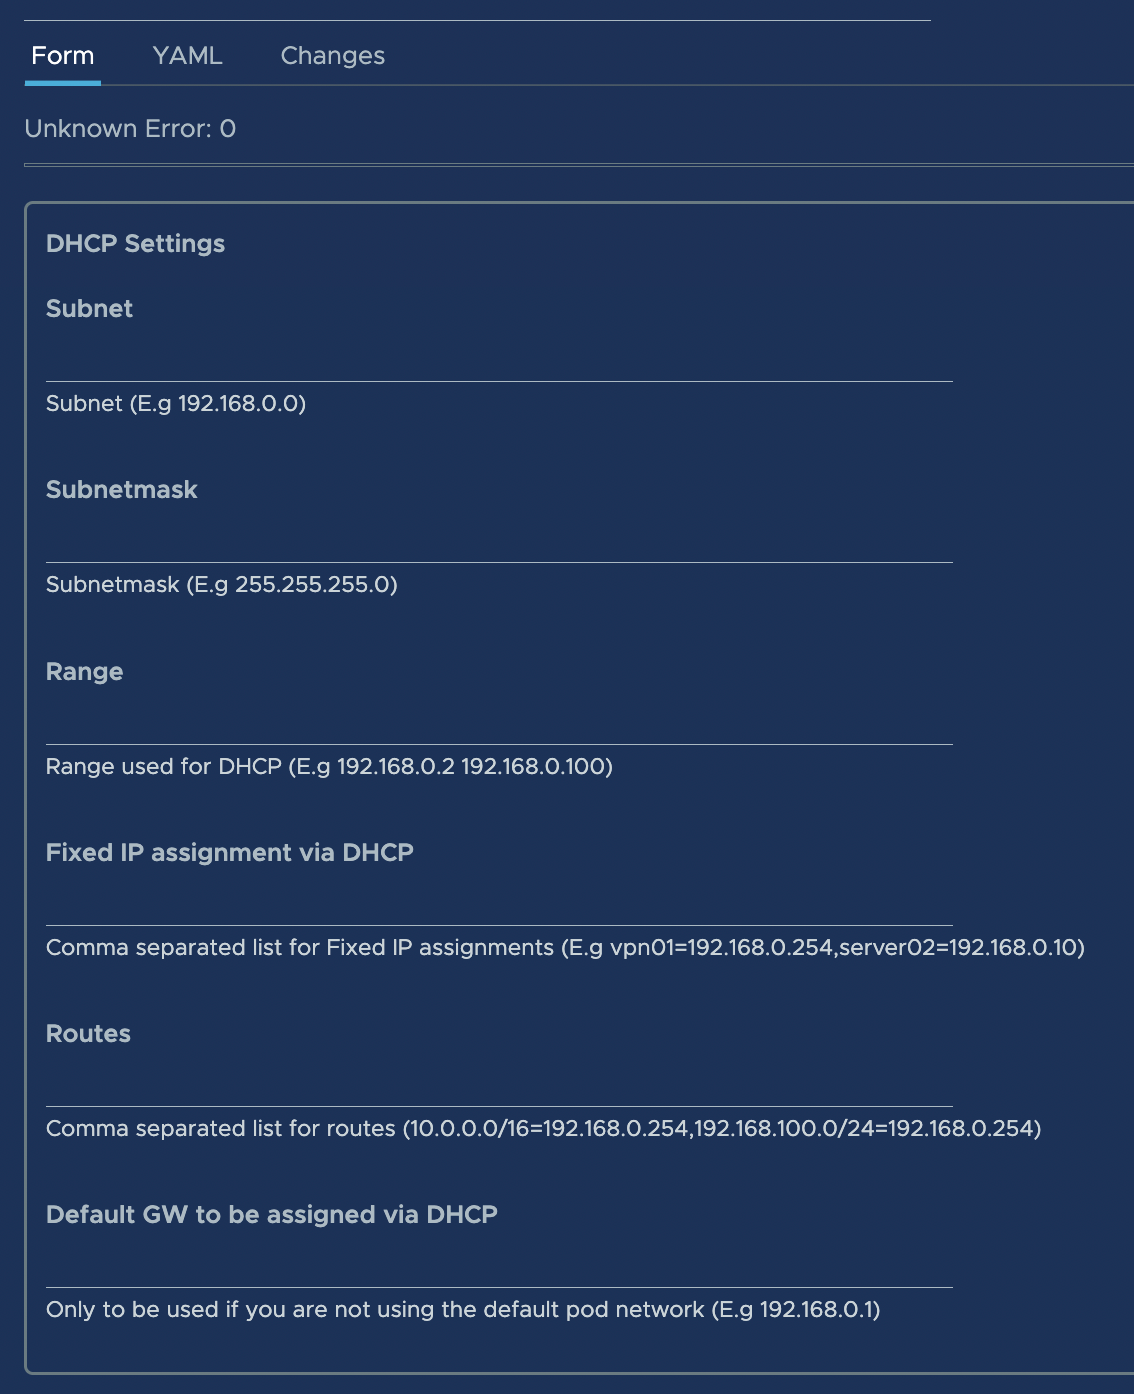 DHCP configuration settings, exposed by clicking the DHCP server application